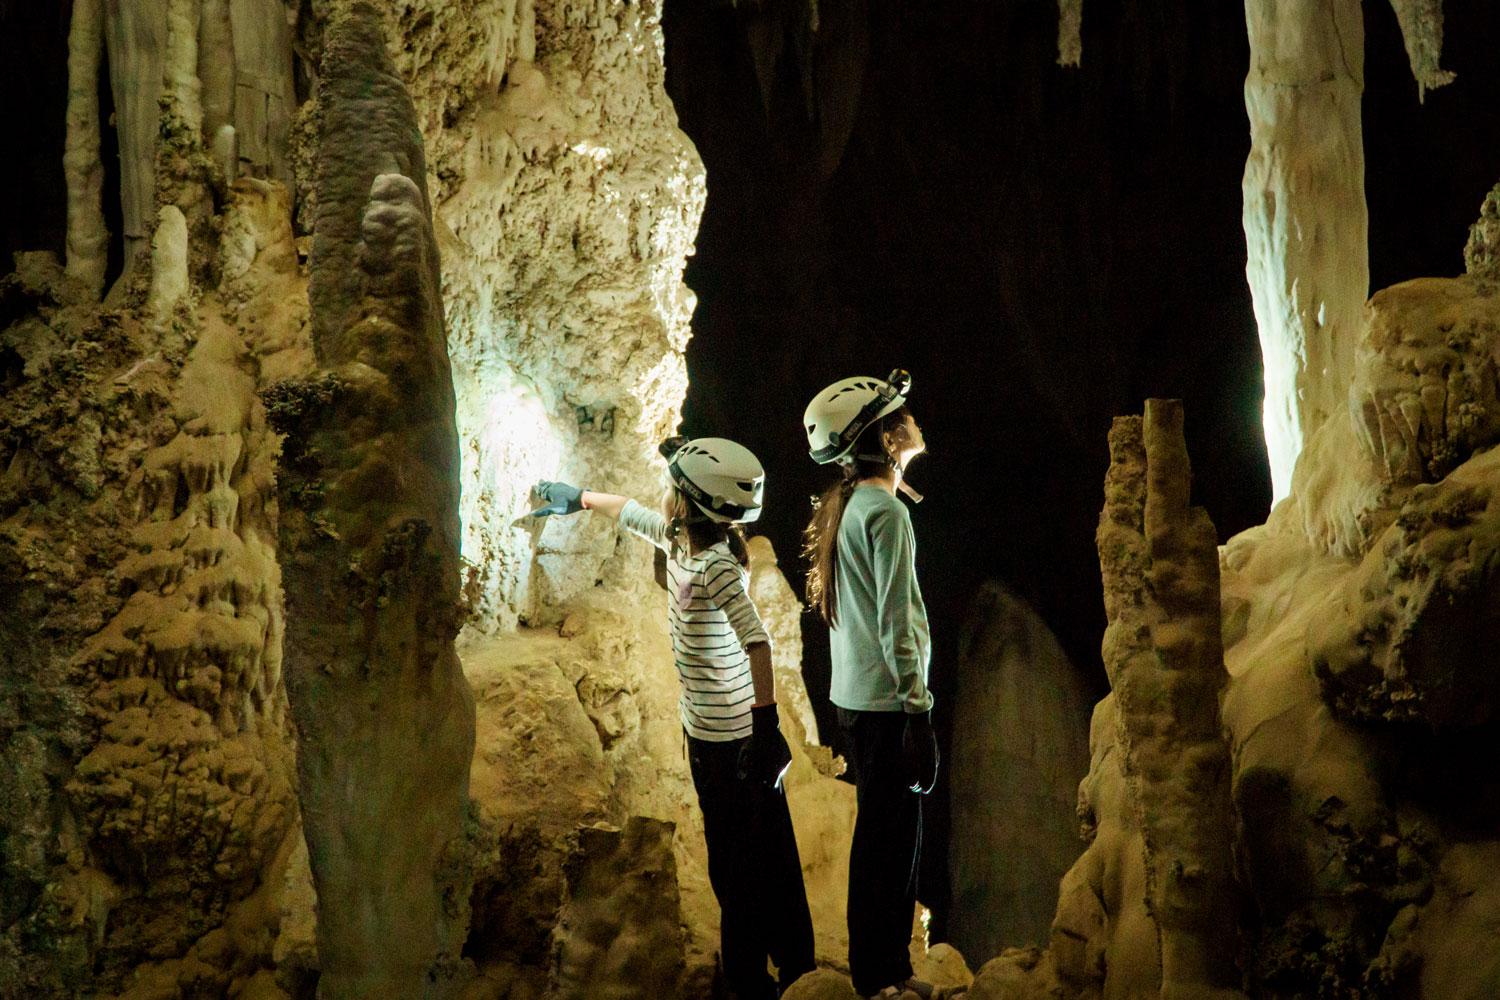 This tour offers parents and their children the opportunity to connect and explore nature together.